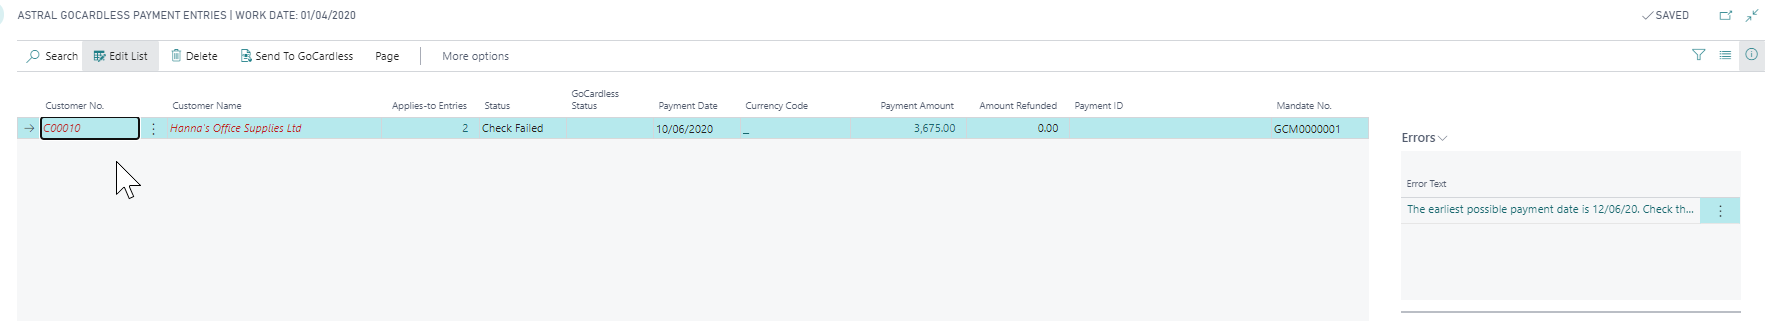 Payment Entries Errors.img